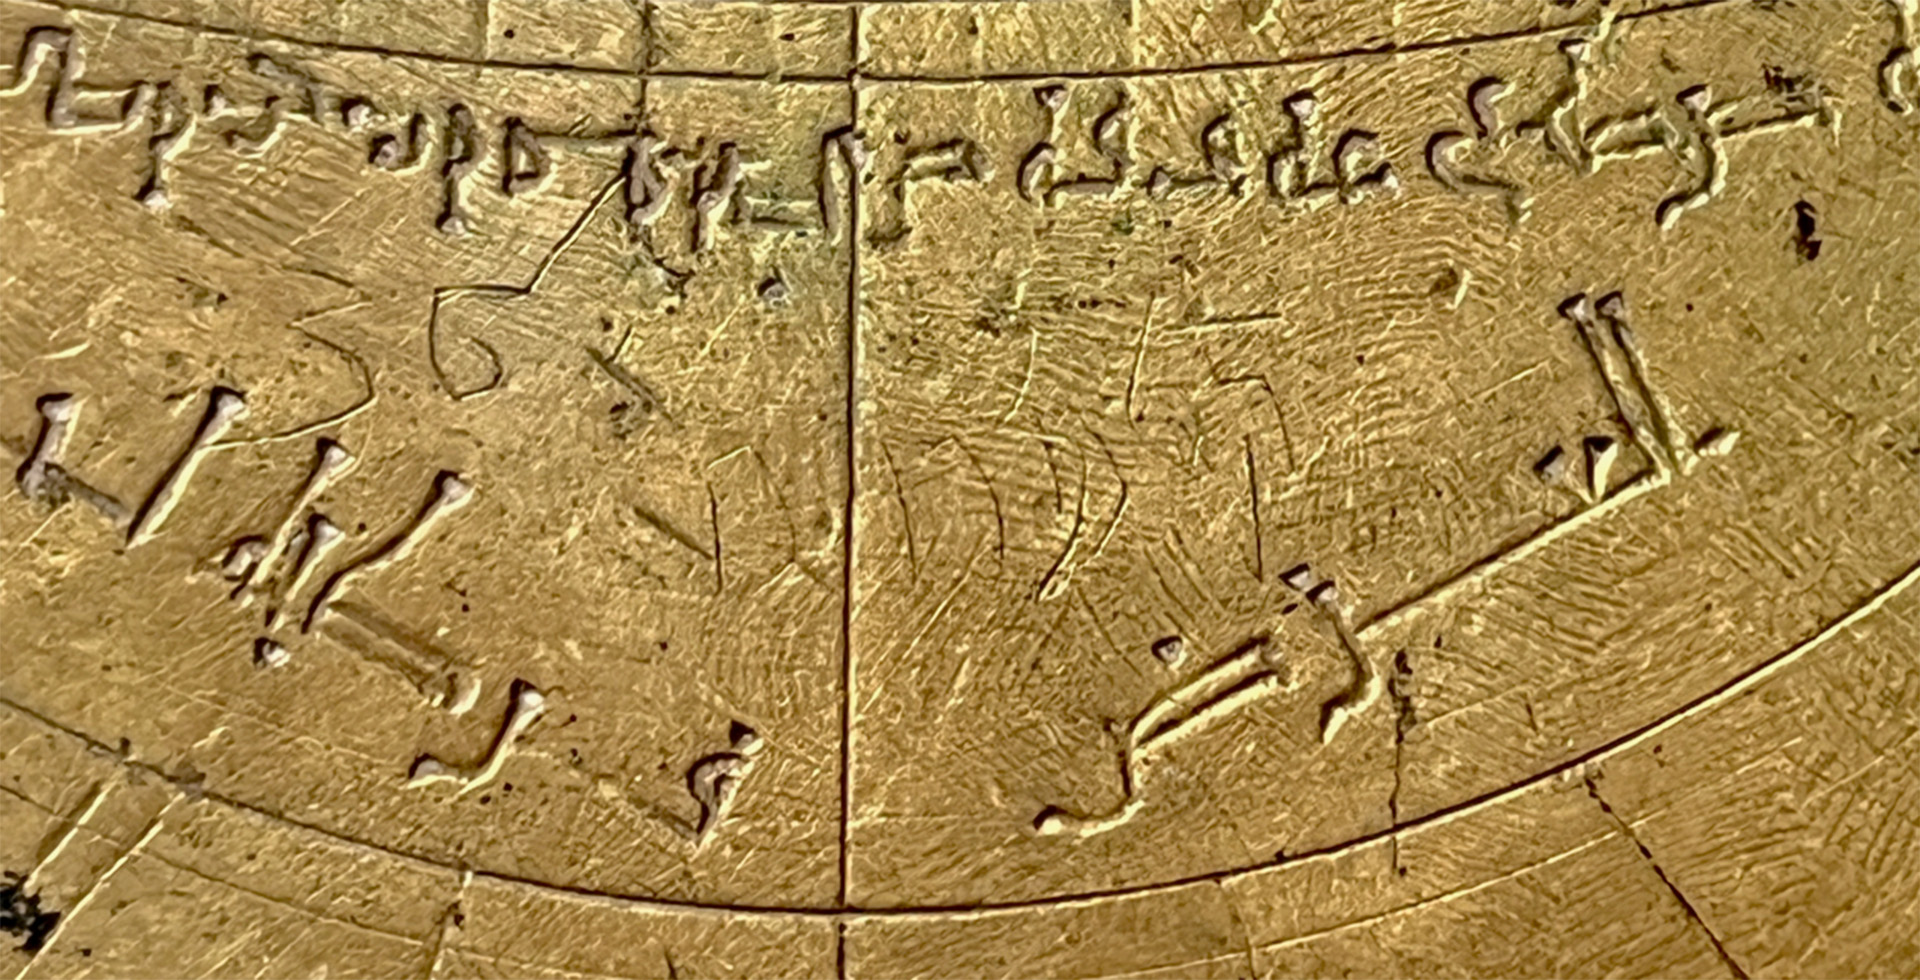 Close-Up-of-the-Verona-Astrolabe-Showing-Hebrew-Arabic-and-Western-Numerals.jpg